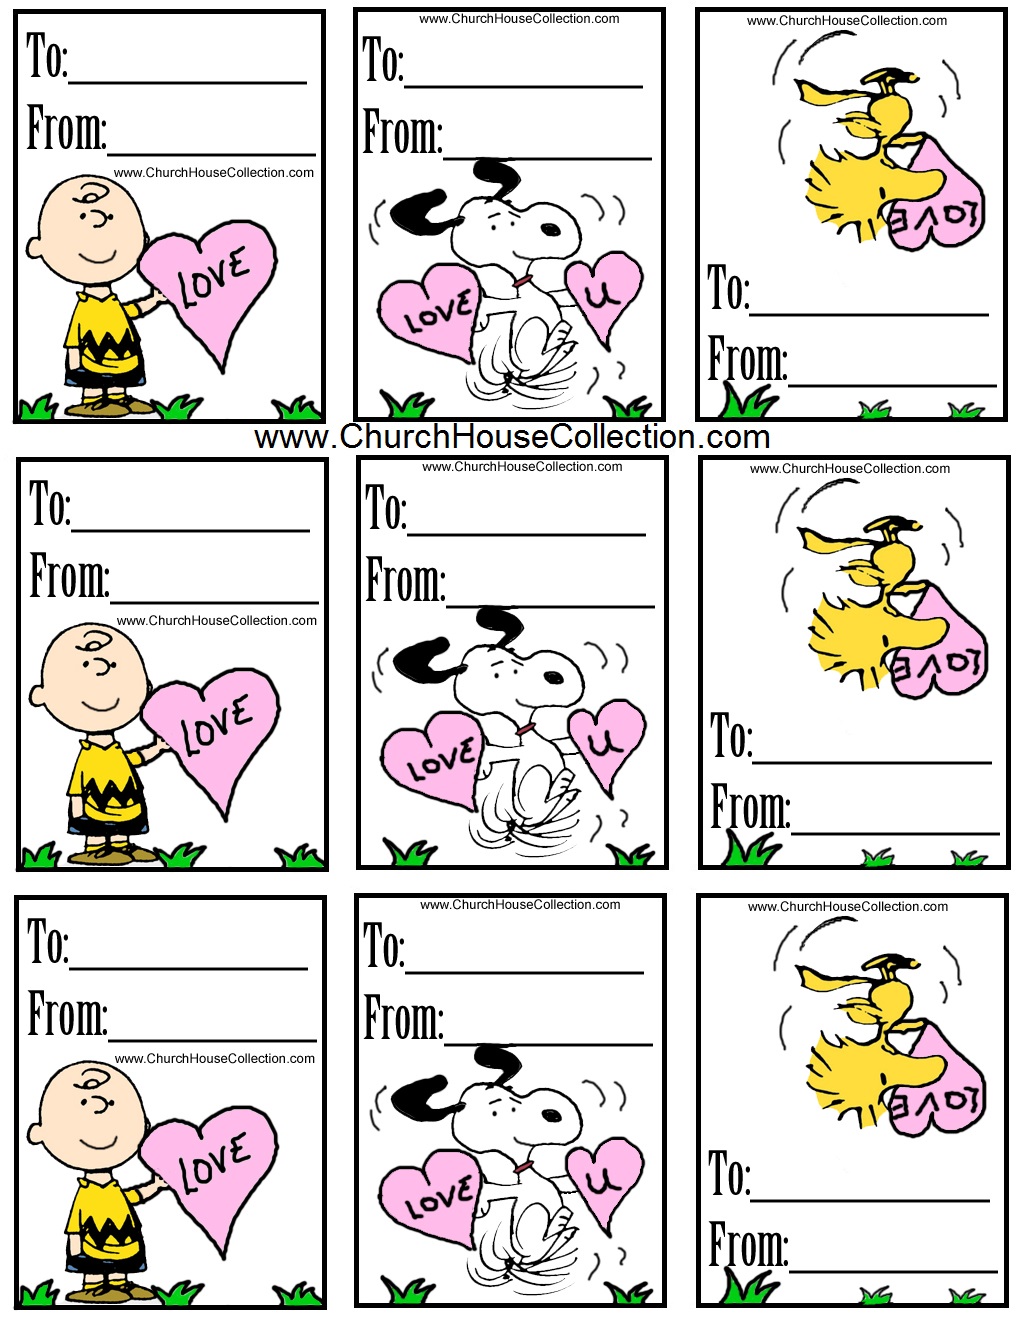 church-house-collection-blog-snoopy-charlie-brown-and-woodstock